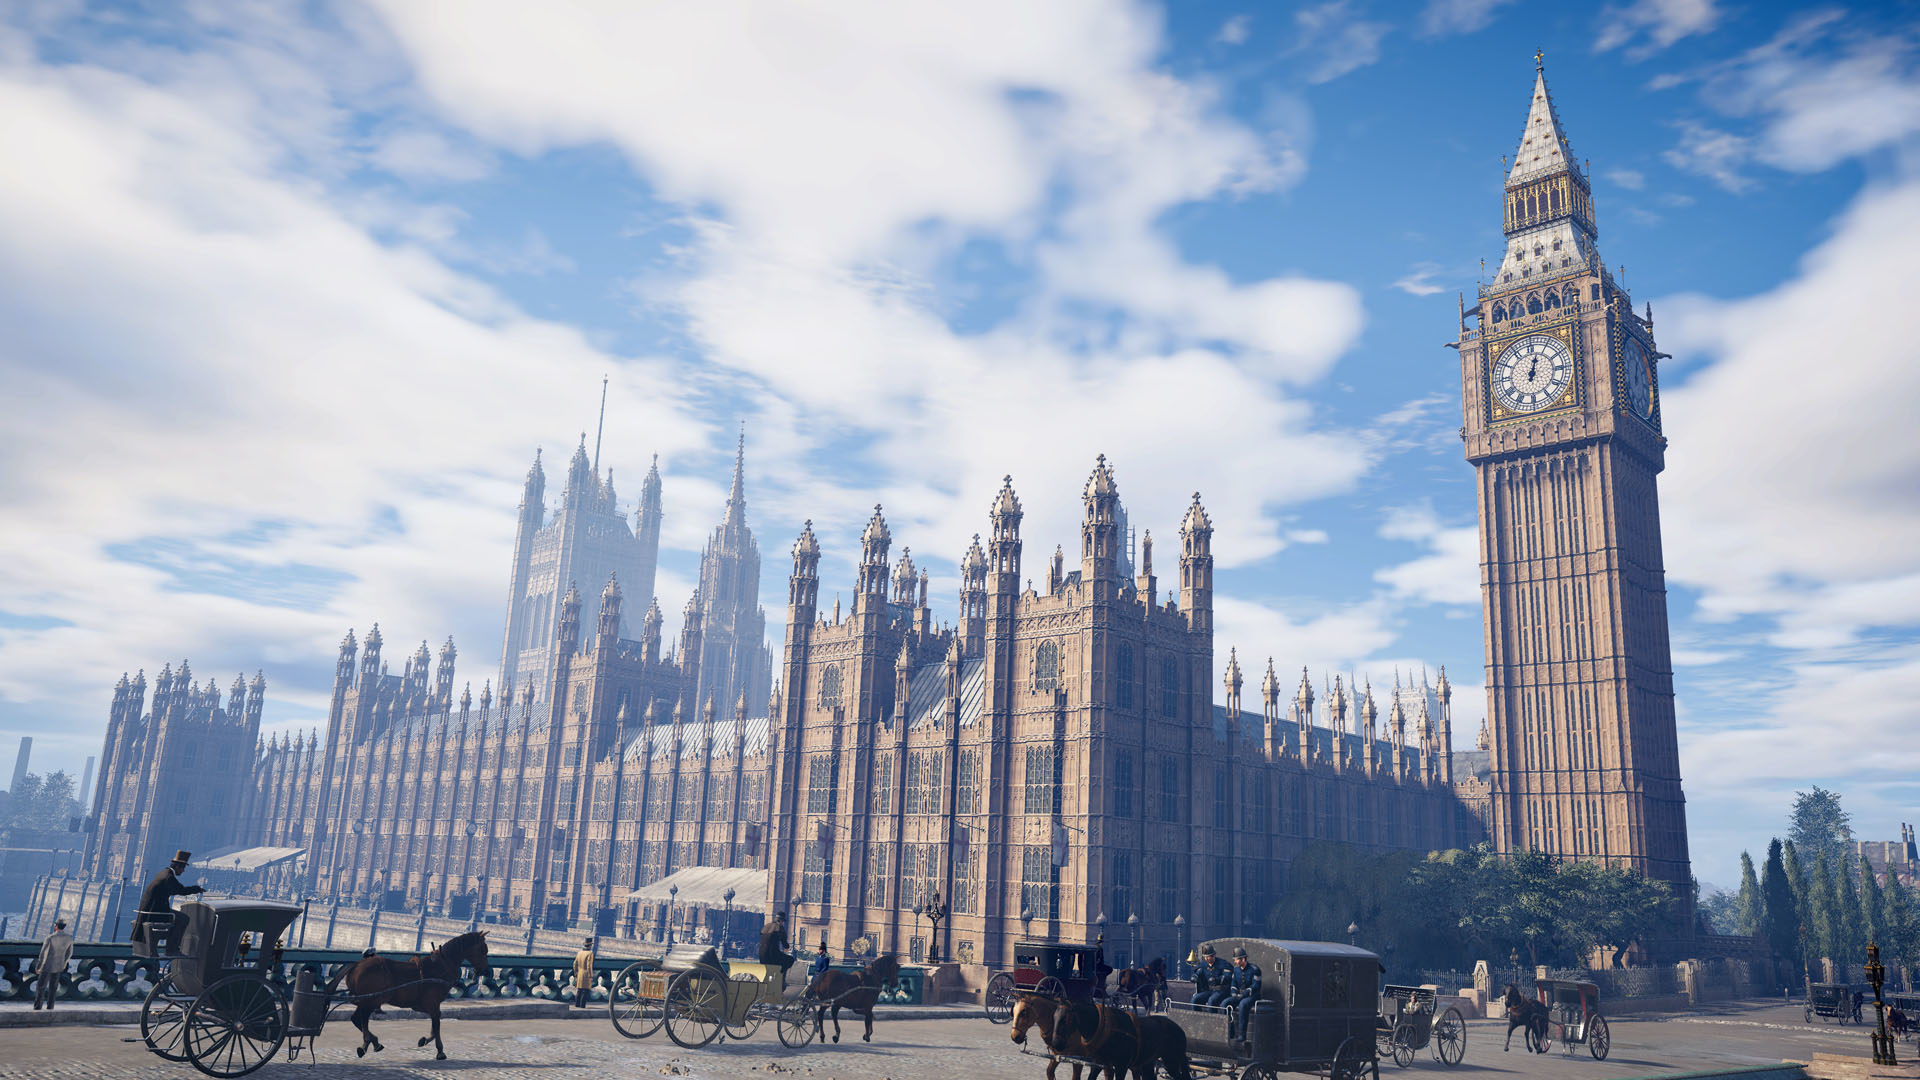 Palace of Westminster | Assassin's Creed Wiki | FANDOM powered by Wikia